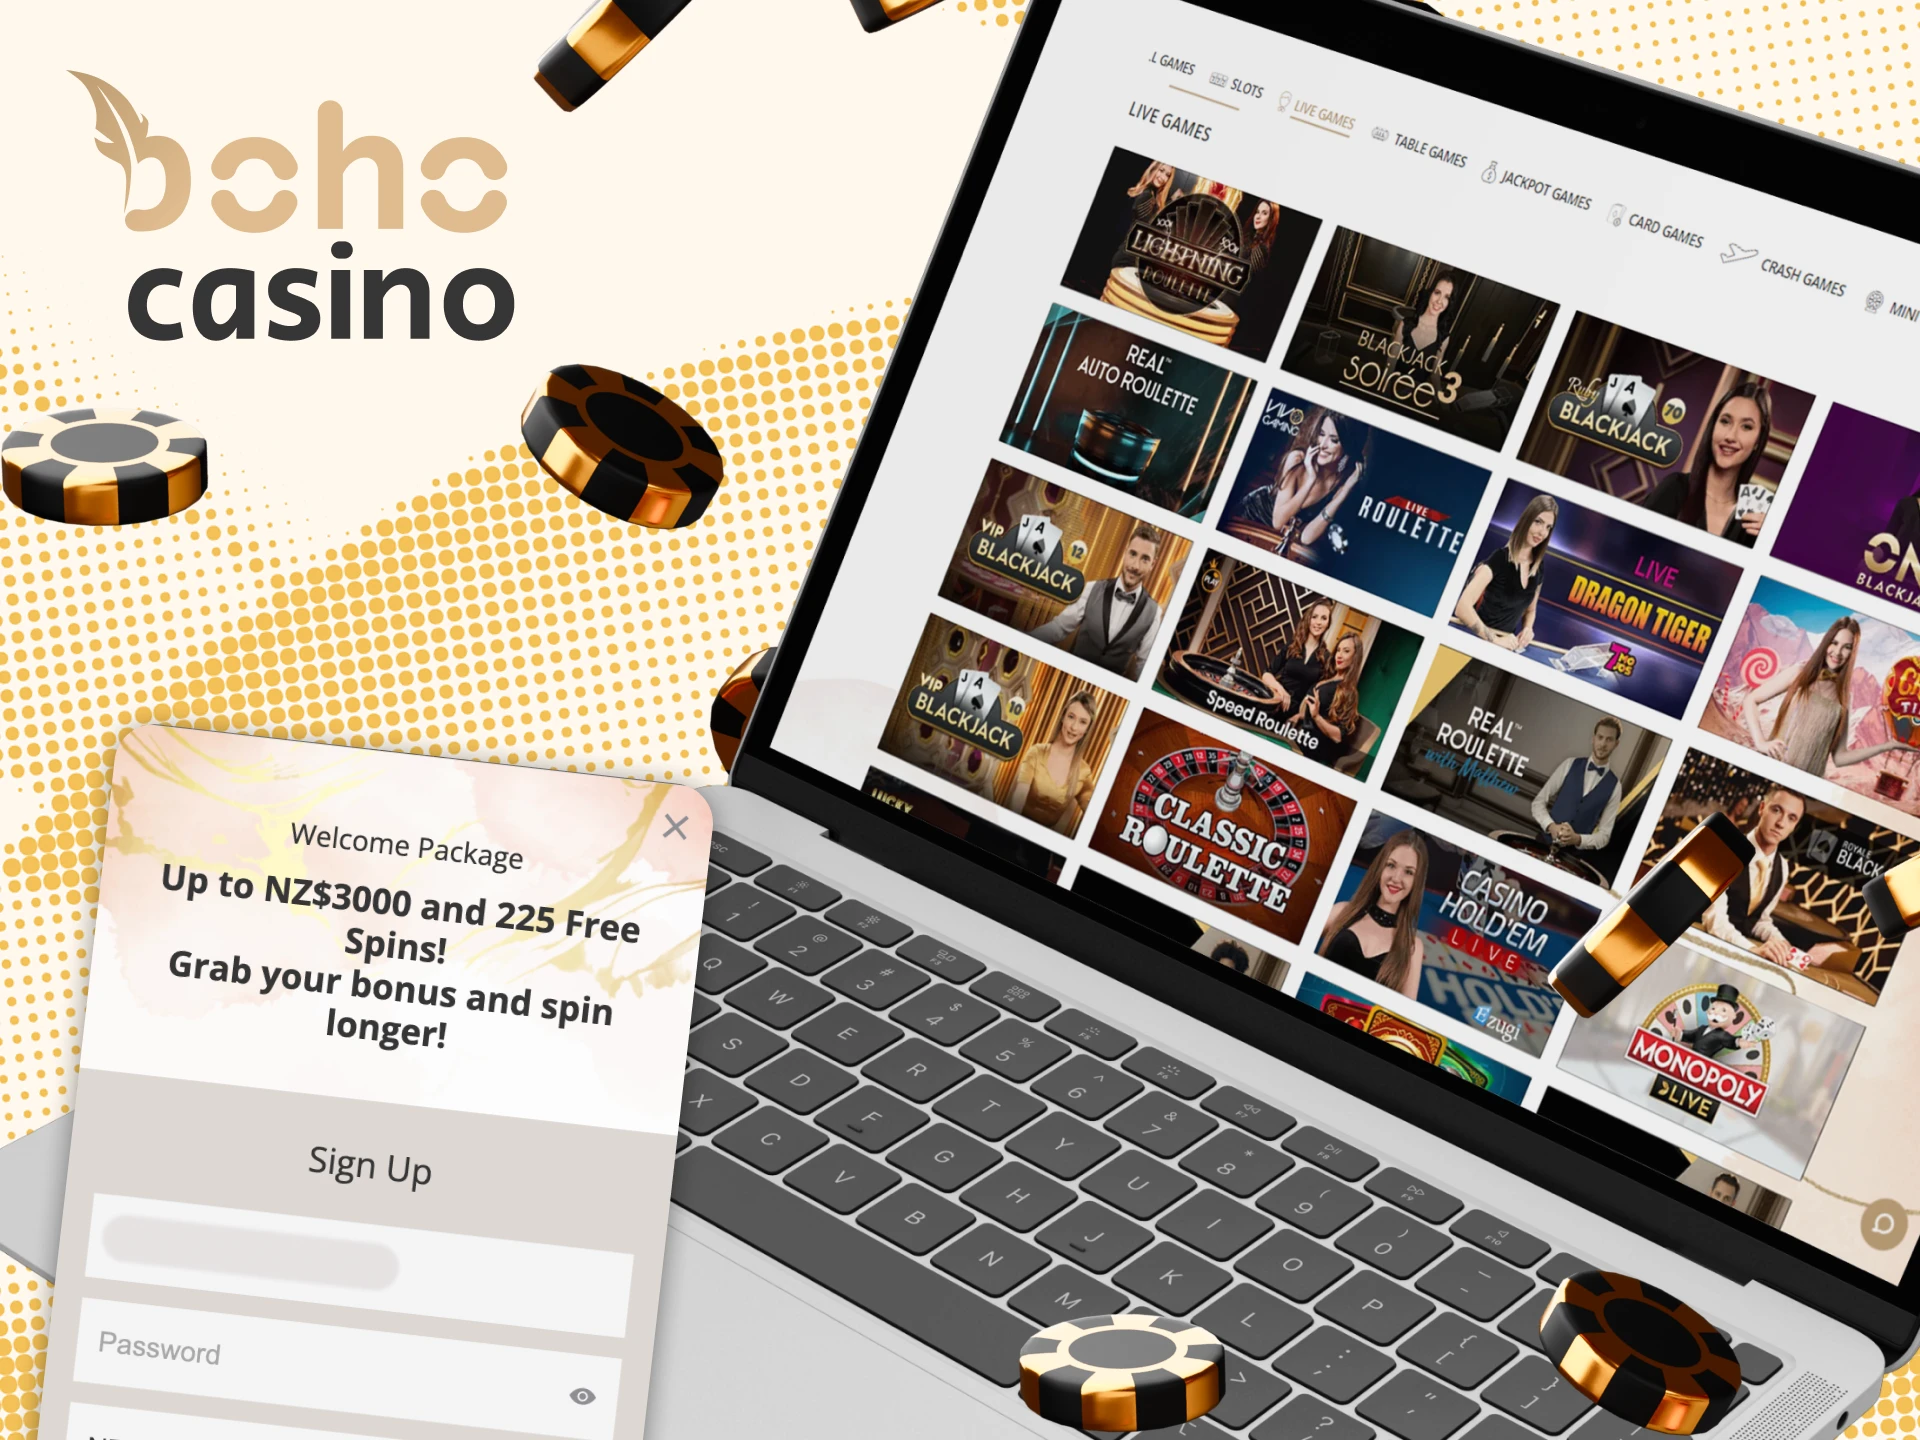 Sign up and deposit to start playing live games at Boho Casino.